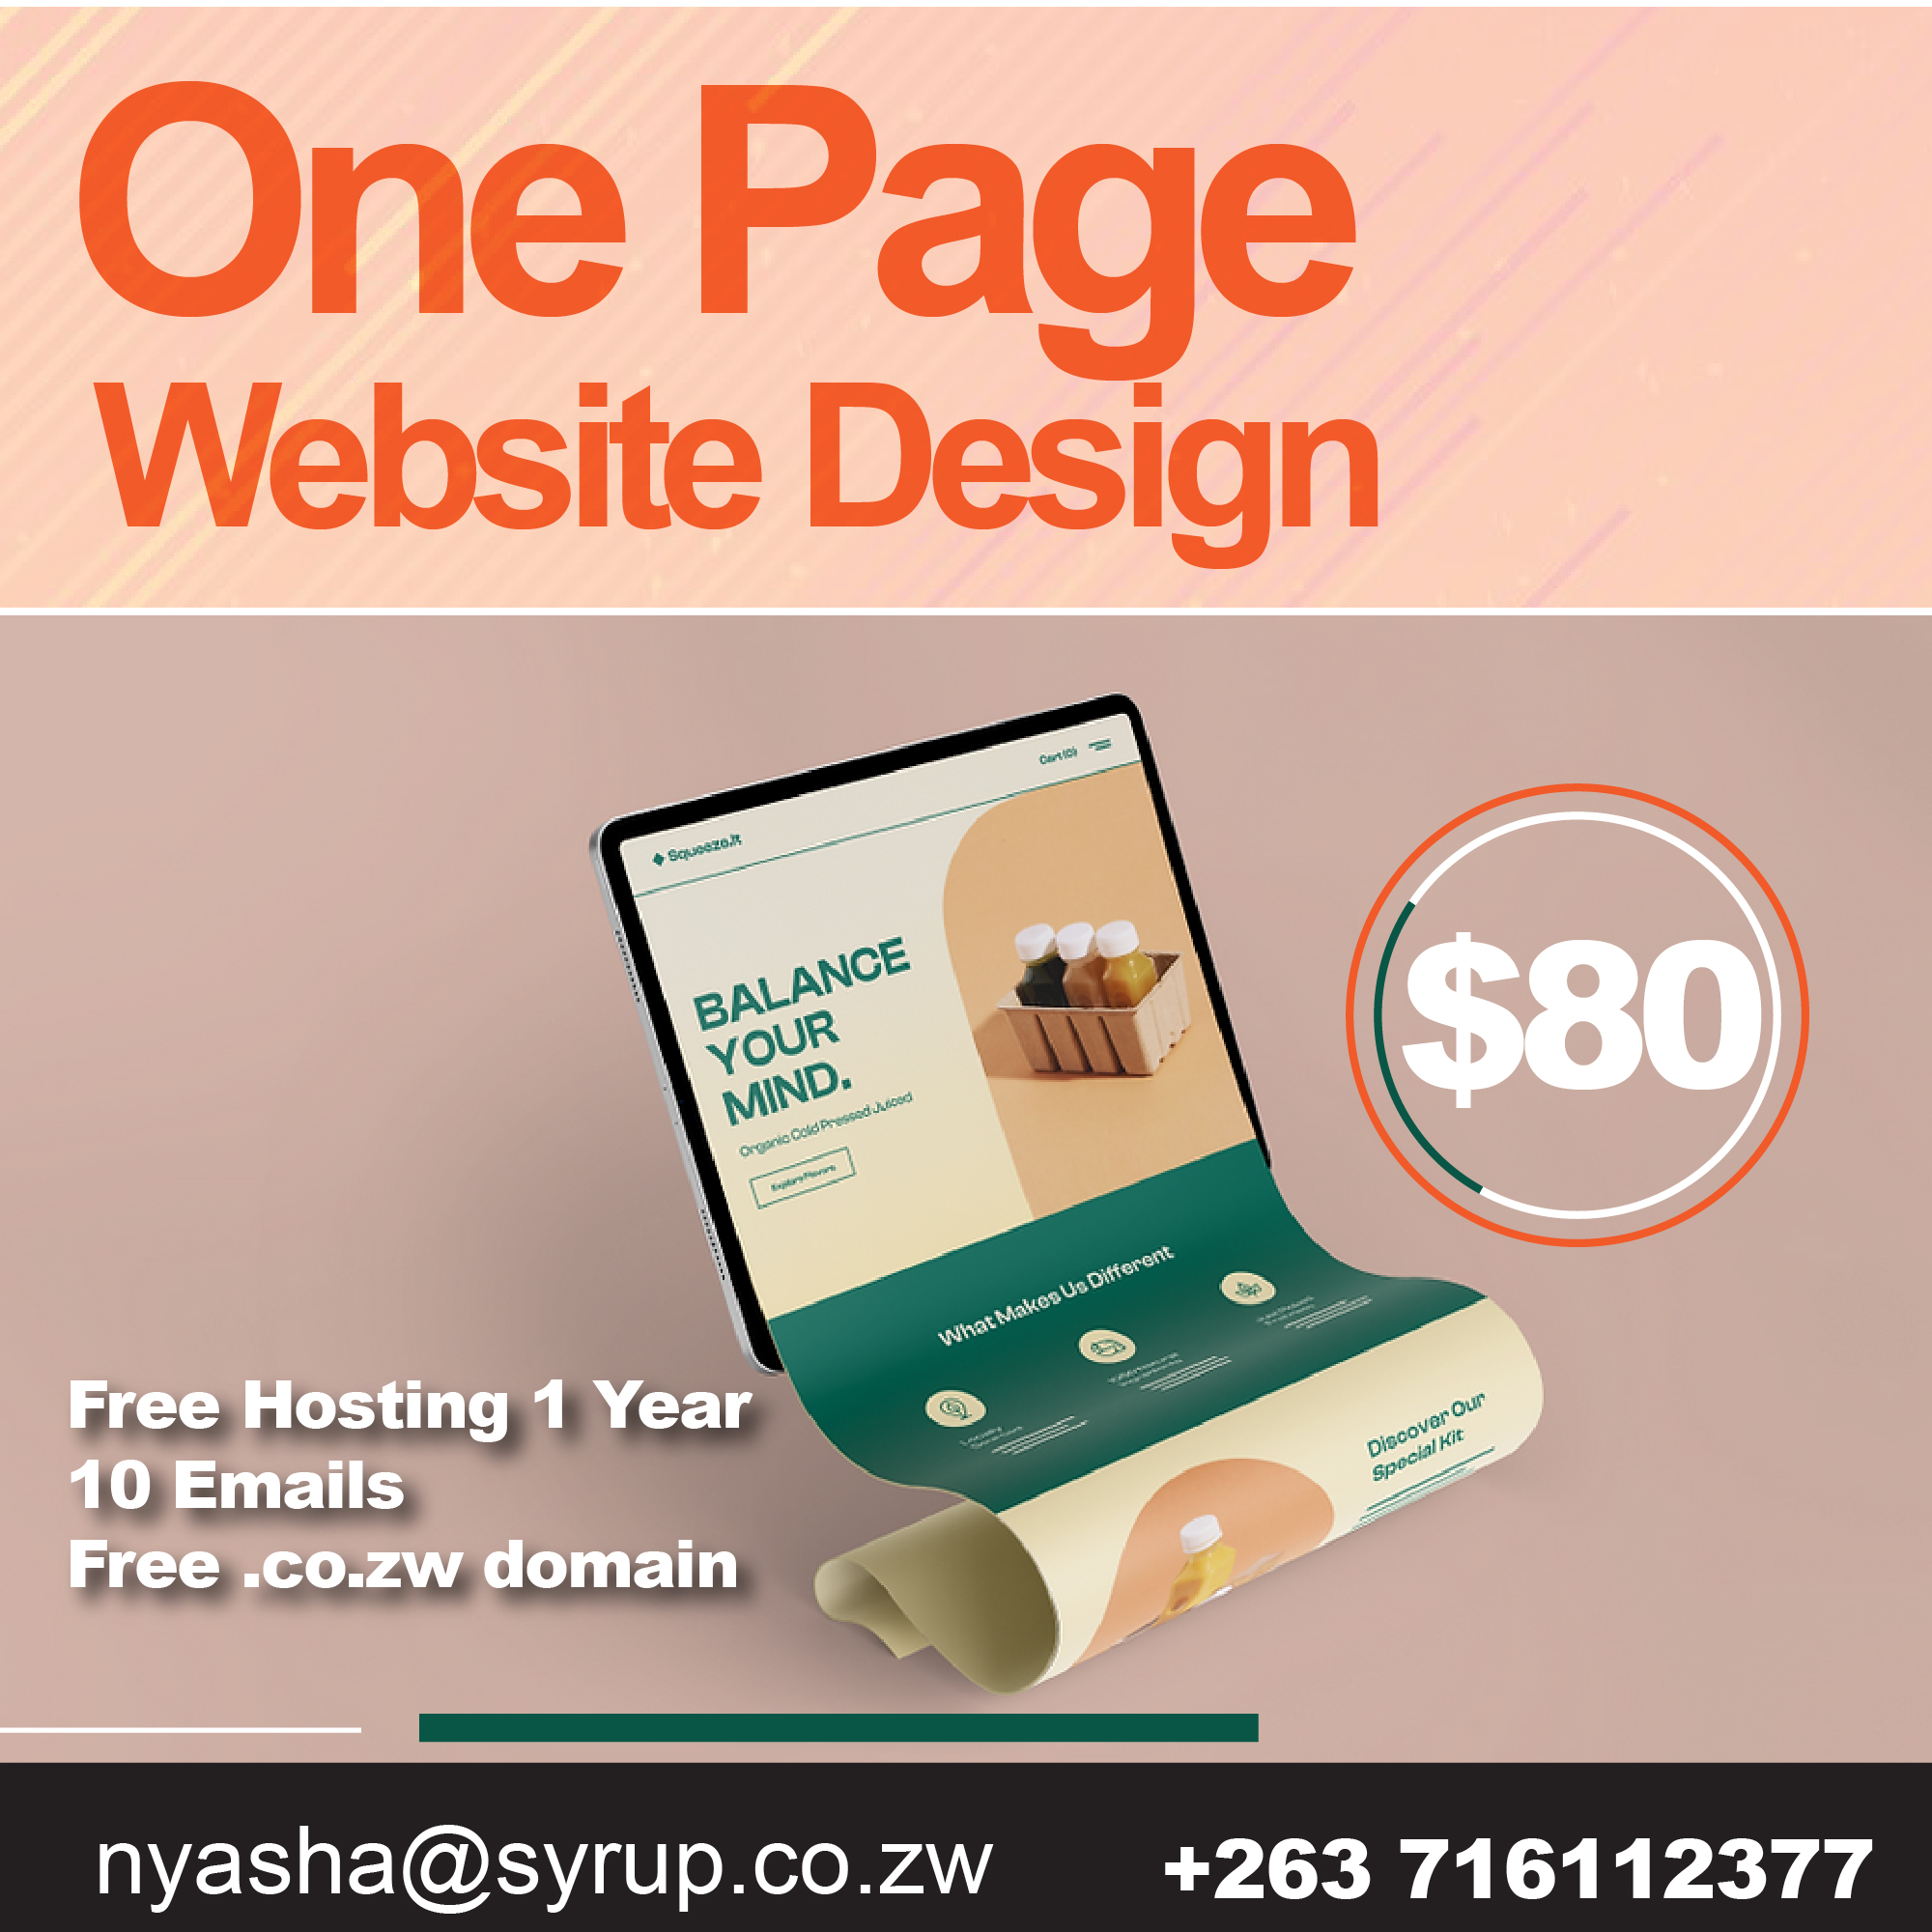 One page website design in Zimbabwe